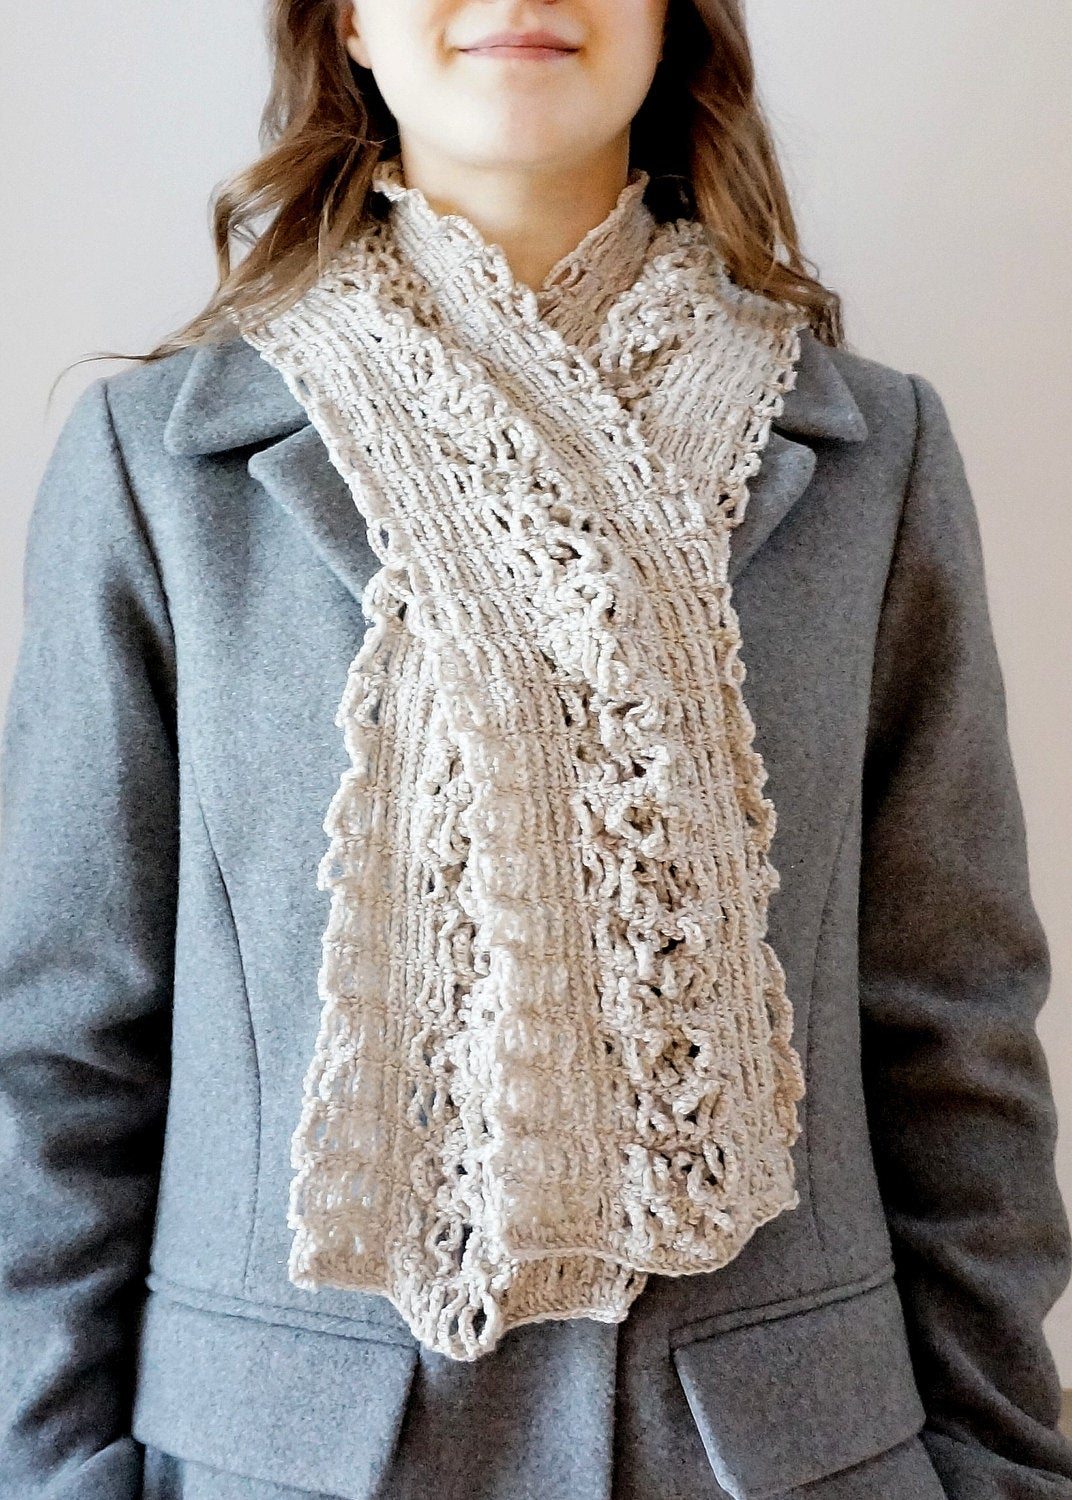 3 Beautiful Crochet Lace Scarf Pattern Easy To Make - Mecrochet.com